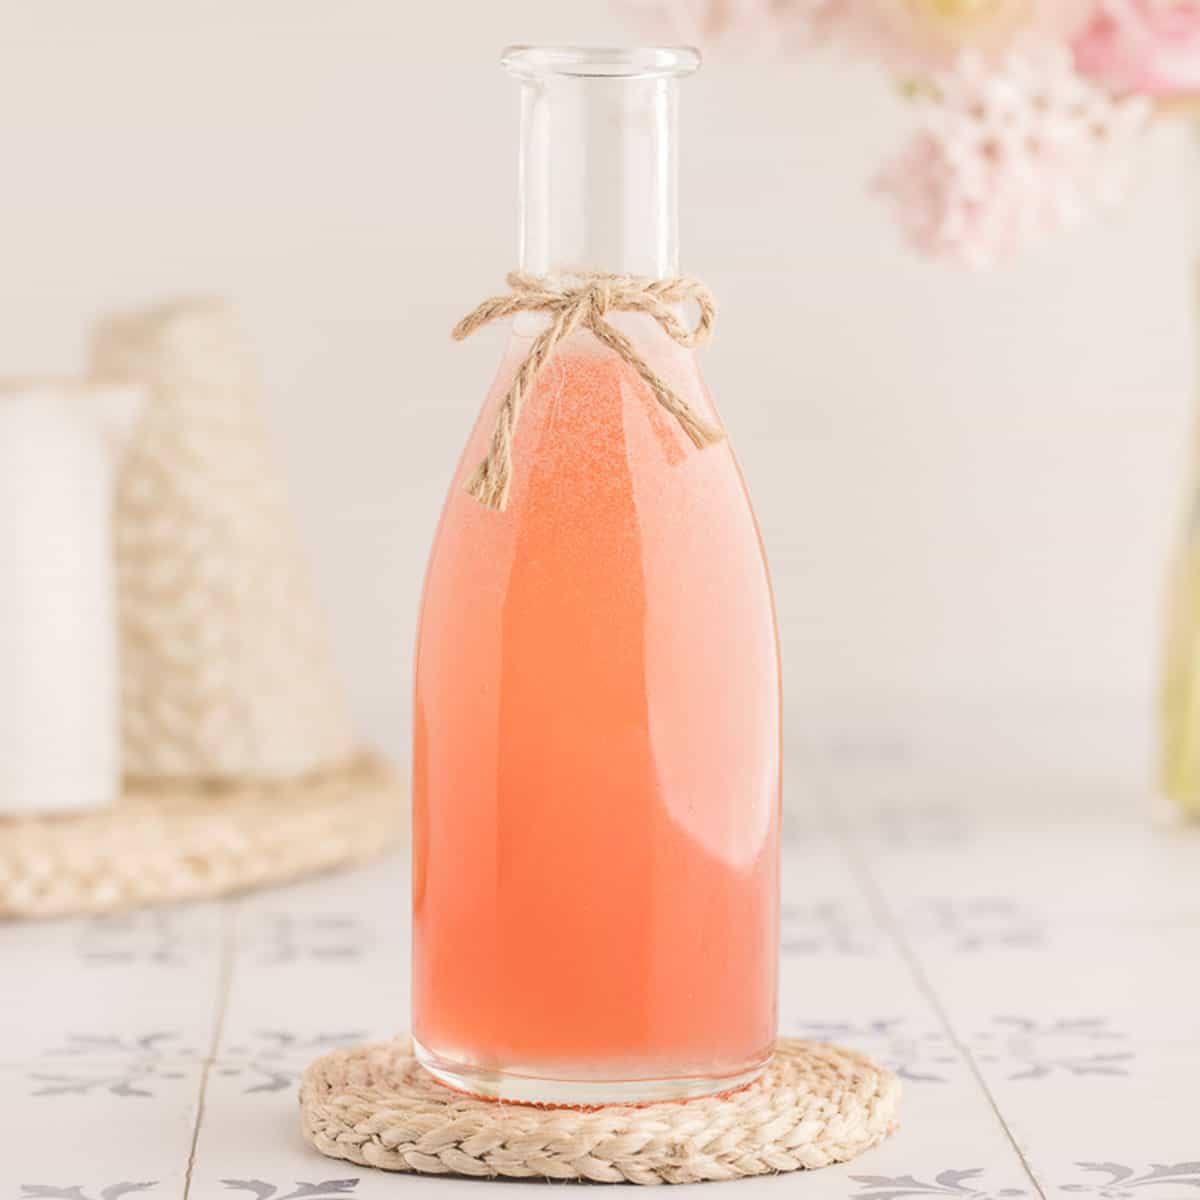 A bottle of pink rhubarb syrup with a bow of twine tied onto the bottleneck, on a woven doily with a white and light background. 